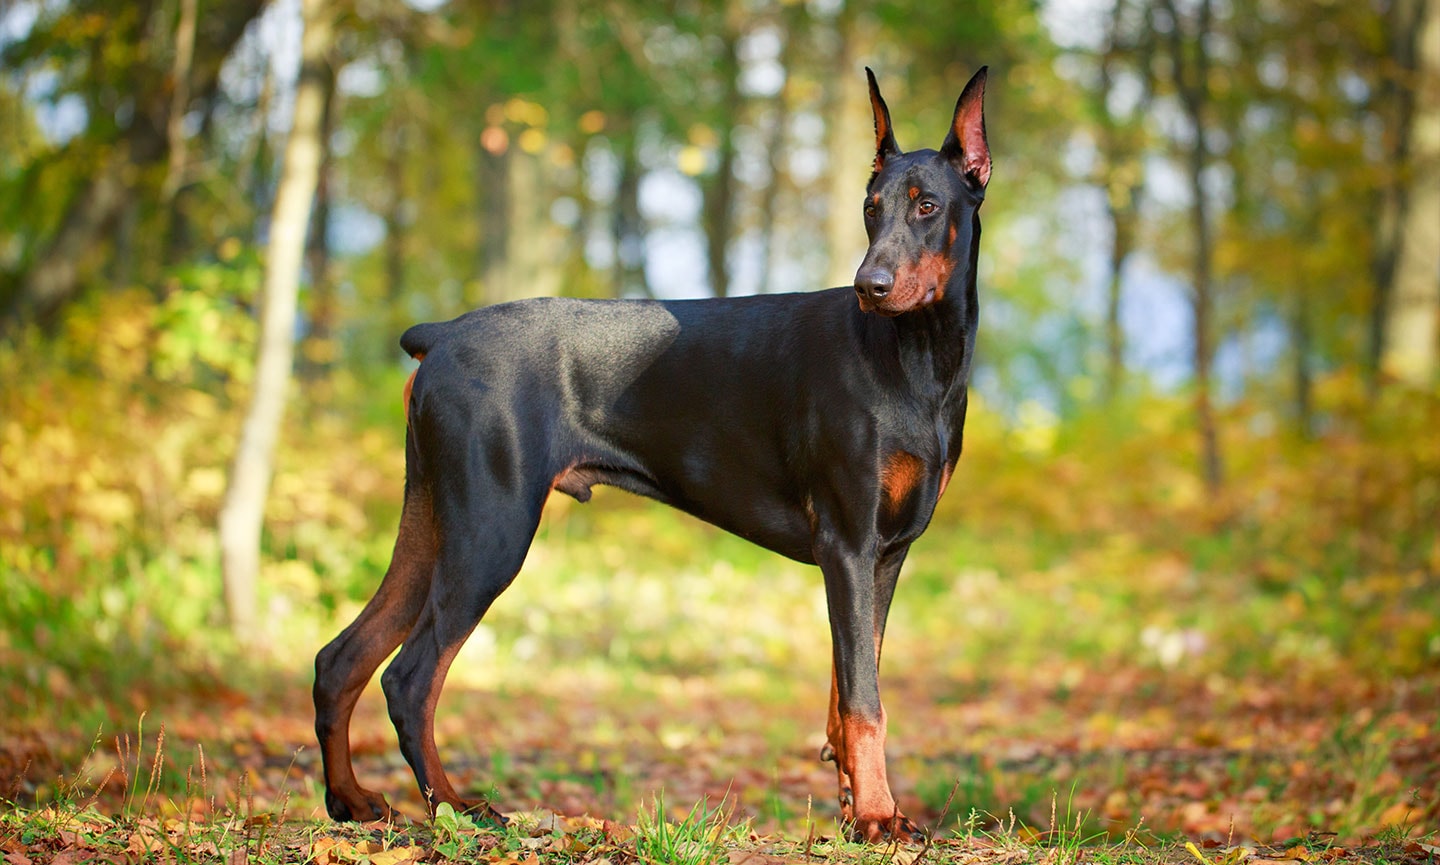 what is doberman short for?